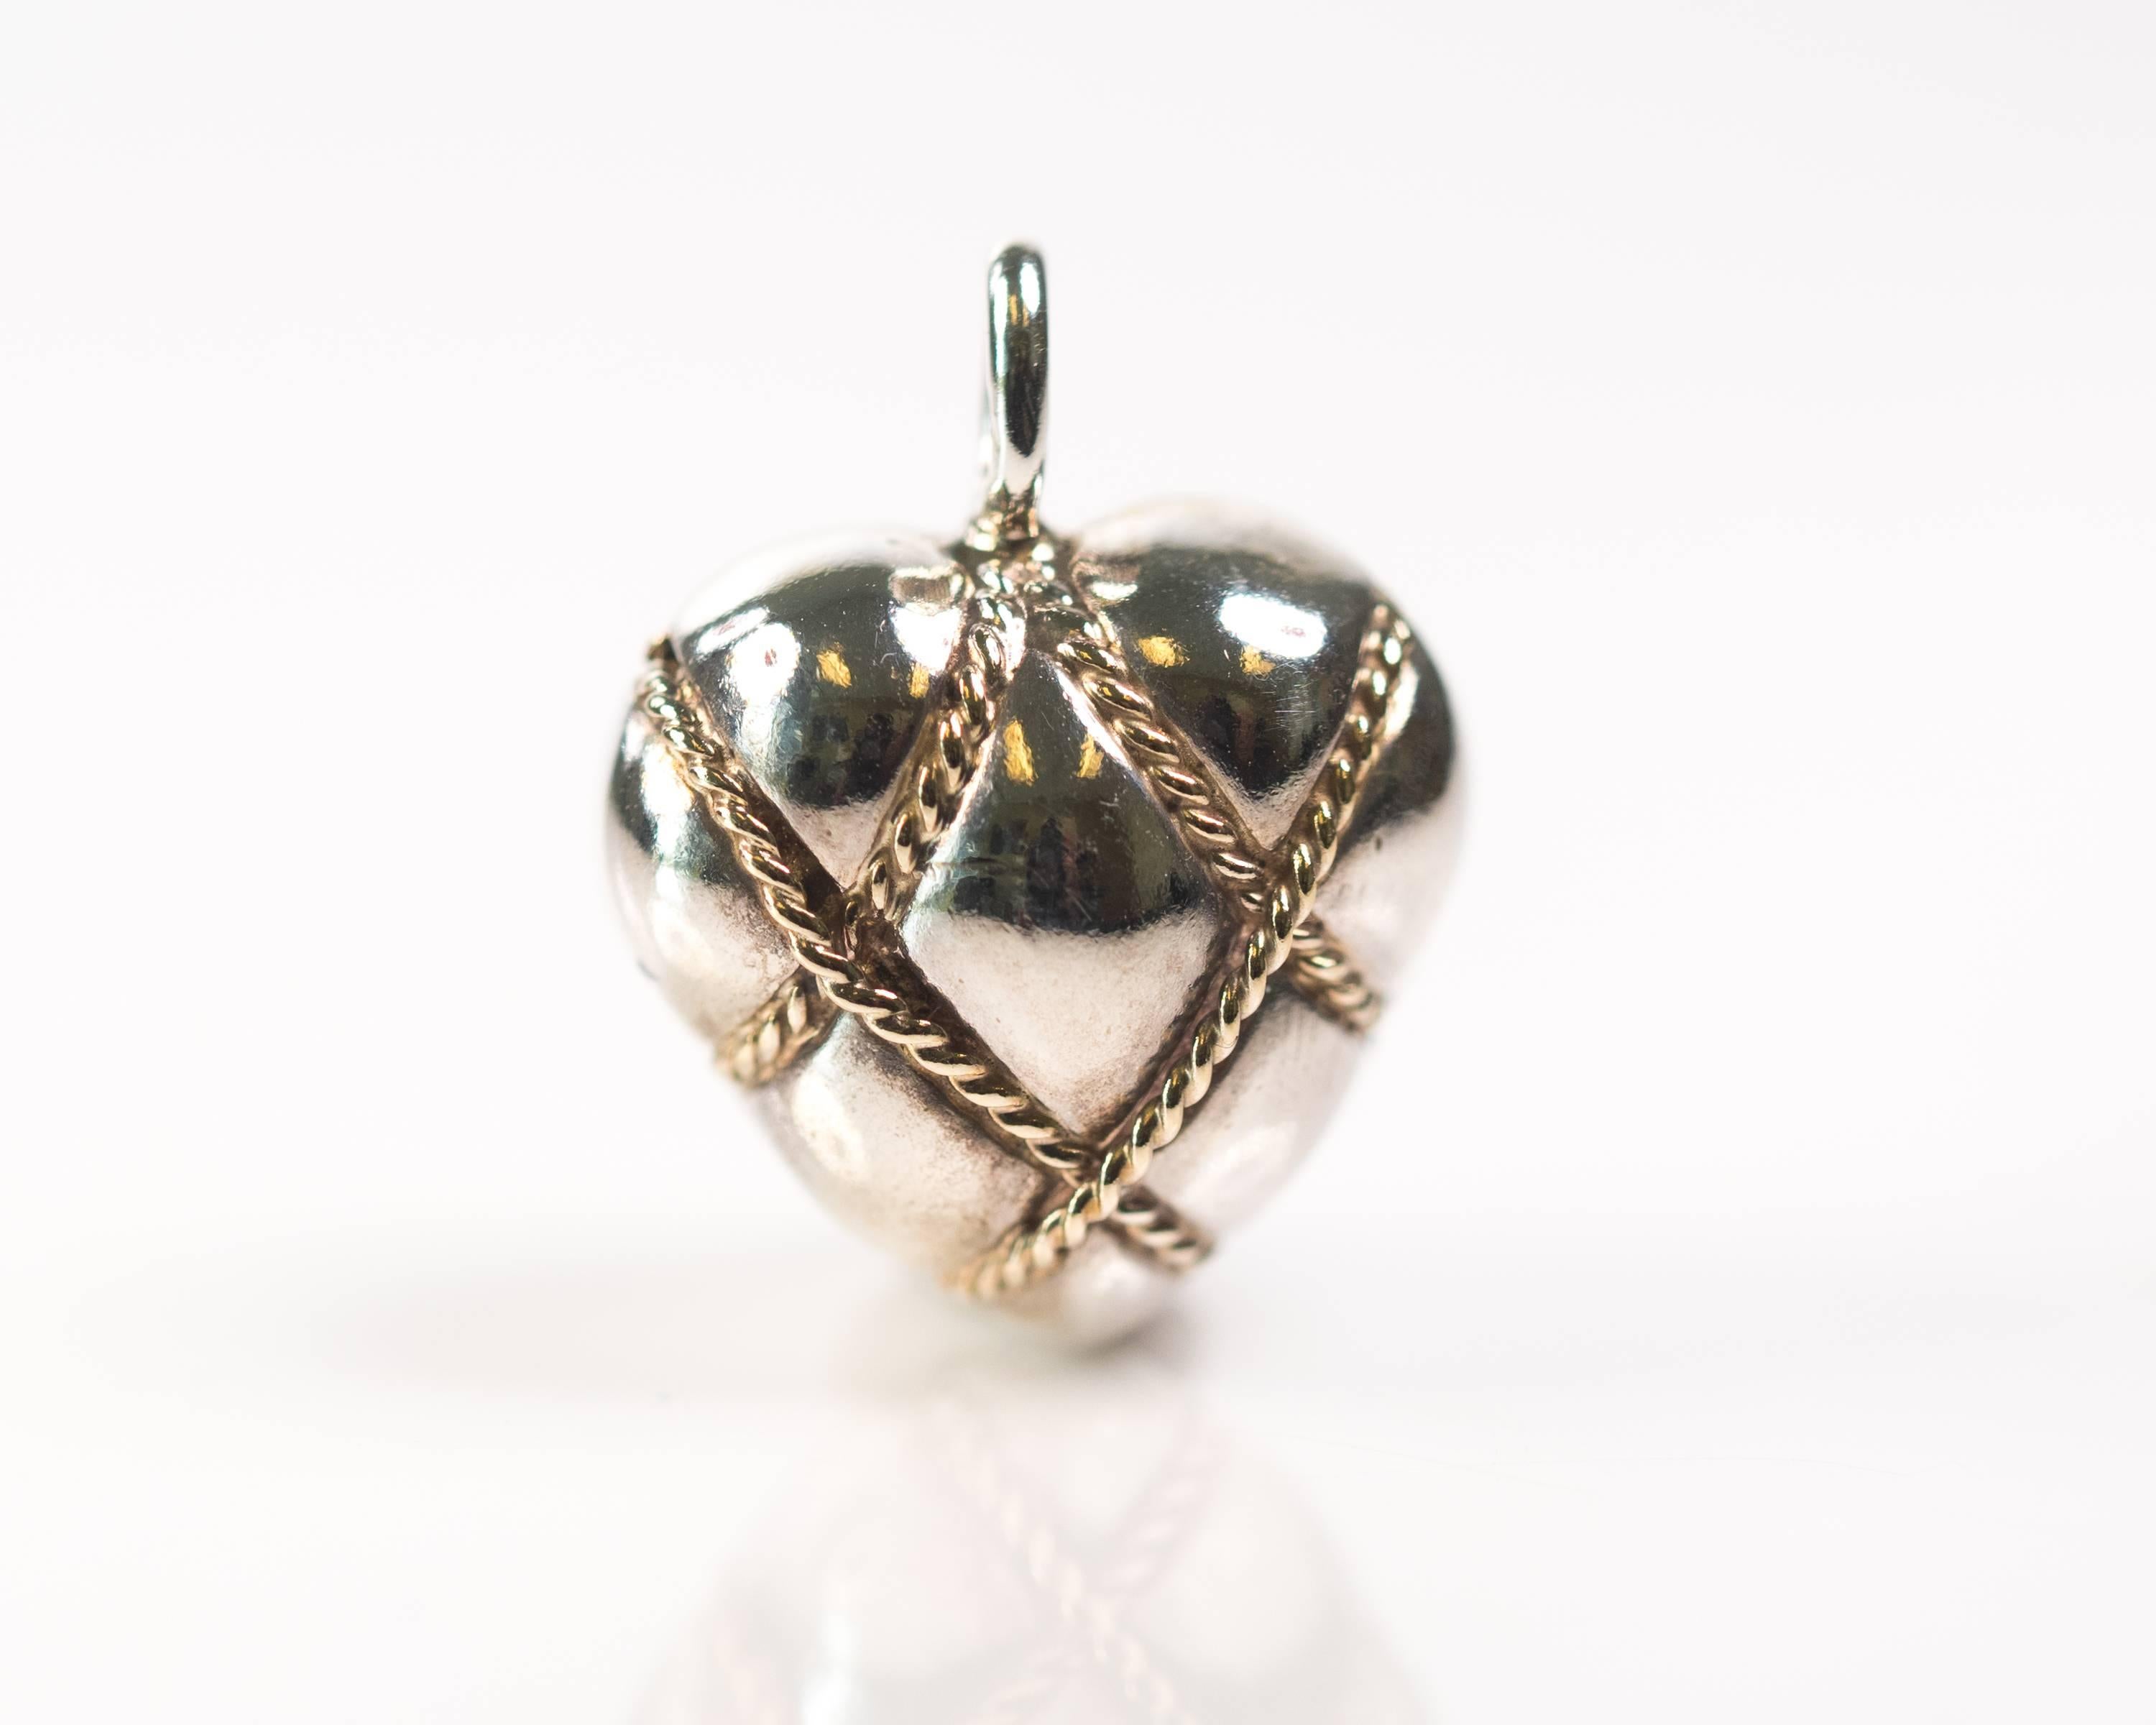 Tiffany and Co Quilted Puffed Heart Pendant - Sterling Silver, 14 Karat Yellow Gold

Features a Puffed Sterling Silver heart, 14 Karat Yellow Gold Rope Cable embellishment and a quilted appearance. 
The Gold Rope Cable wraps around the heart in a a